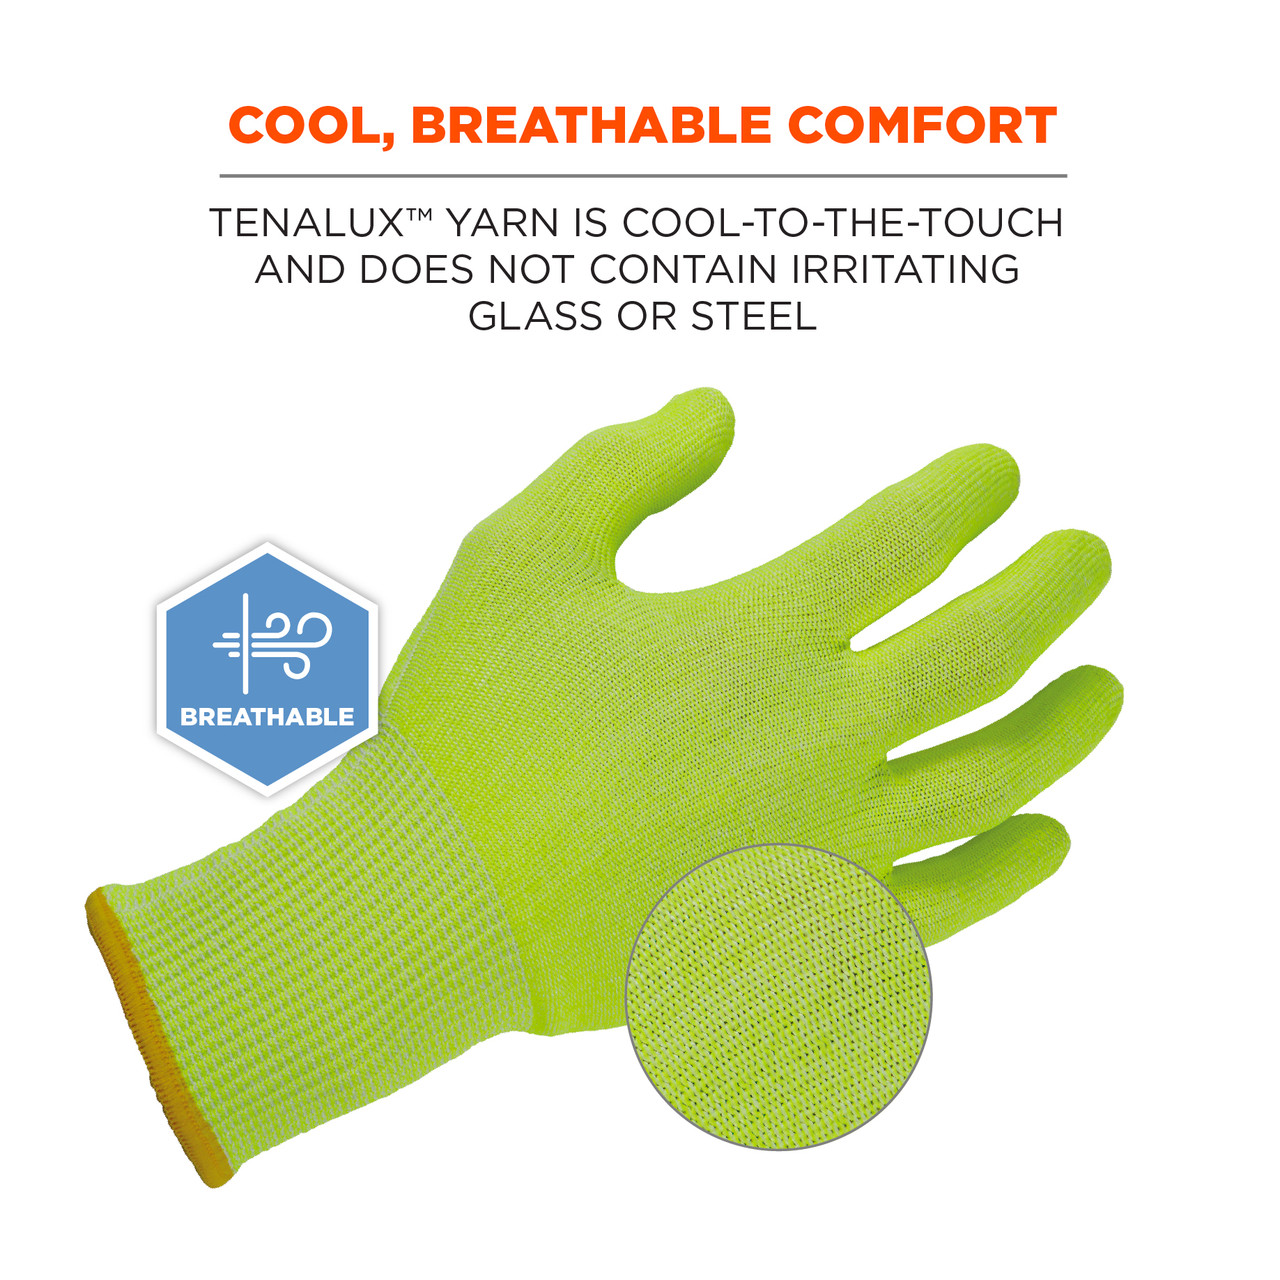 https://cdn11.bigcommerce.com/s-8715e/images/stencil/1280x1280/products/362864/684392/18022-7040-case-cut-resistant-food-grade-gloves-lime-cool-breathable-comfort_0__24665.1702331798.jpg?c=2?imbypass=on